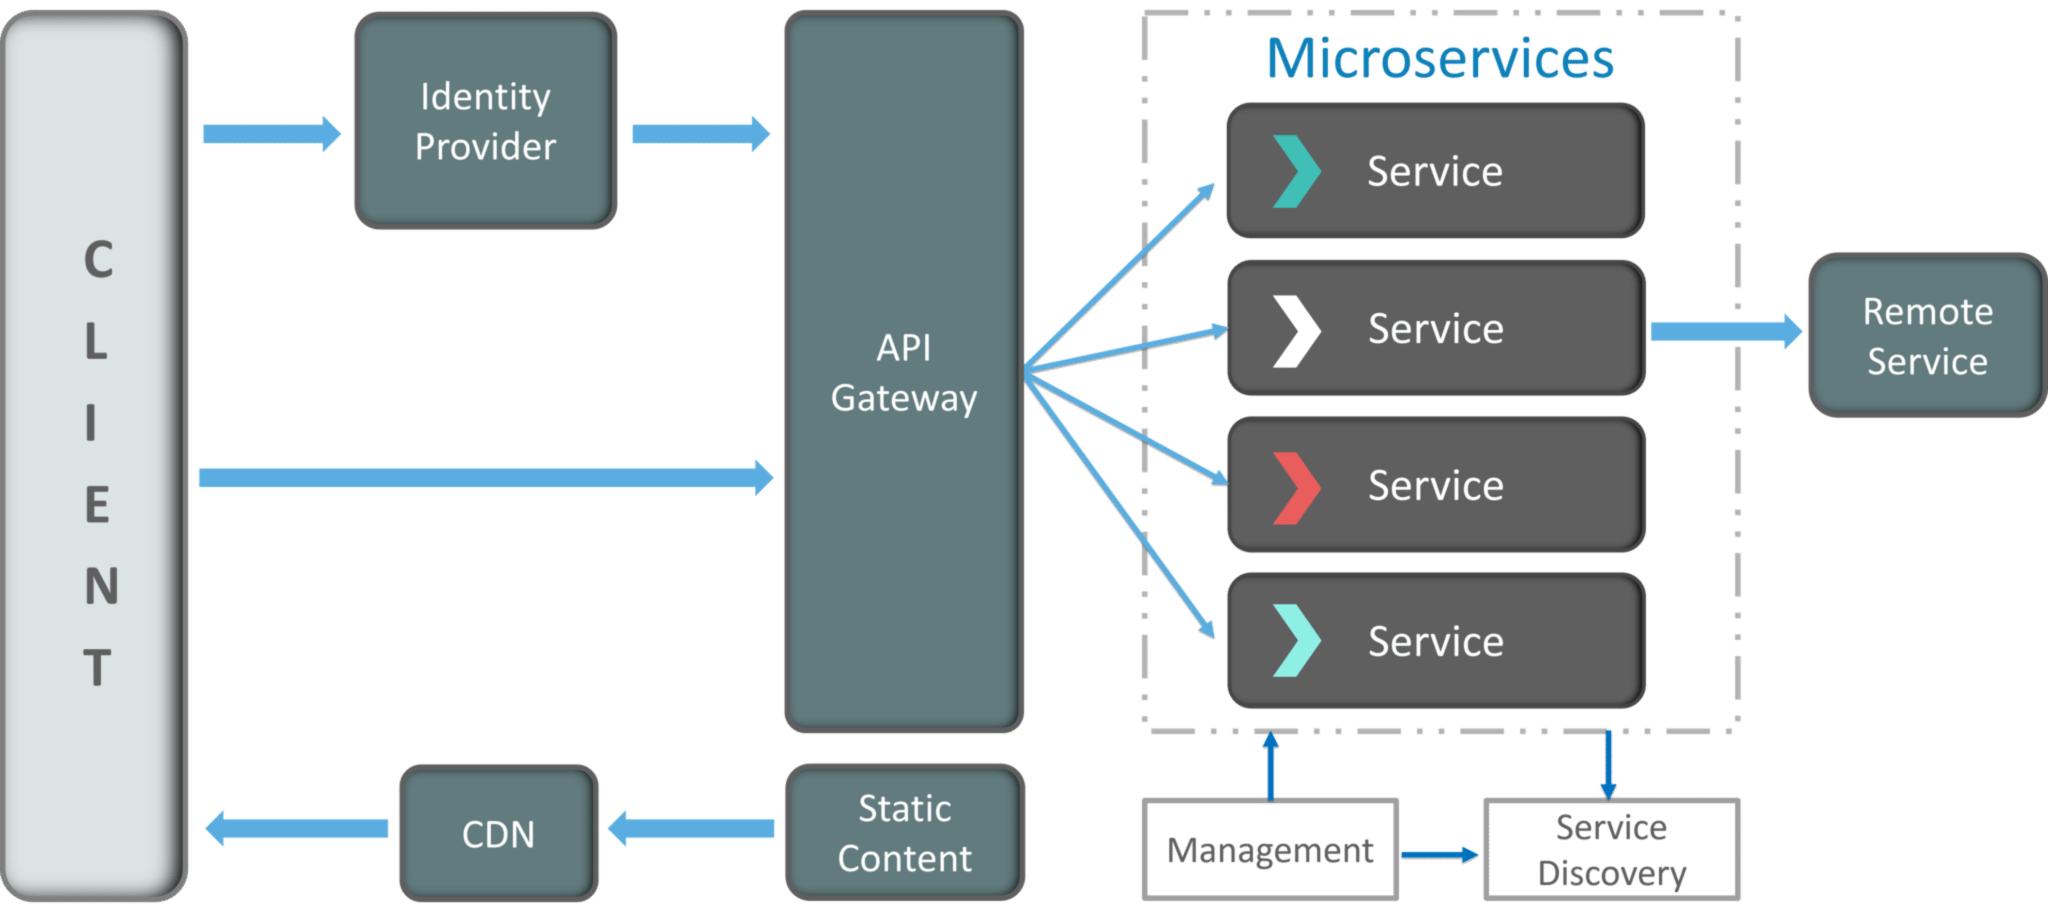 Working of Microservices Architecture - Microservices Interview Questions - Edureka